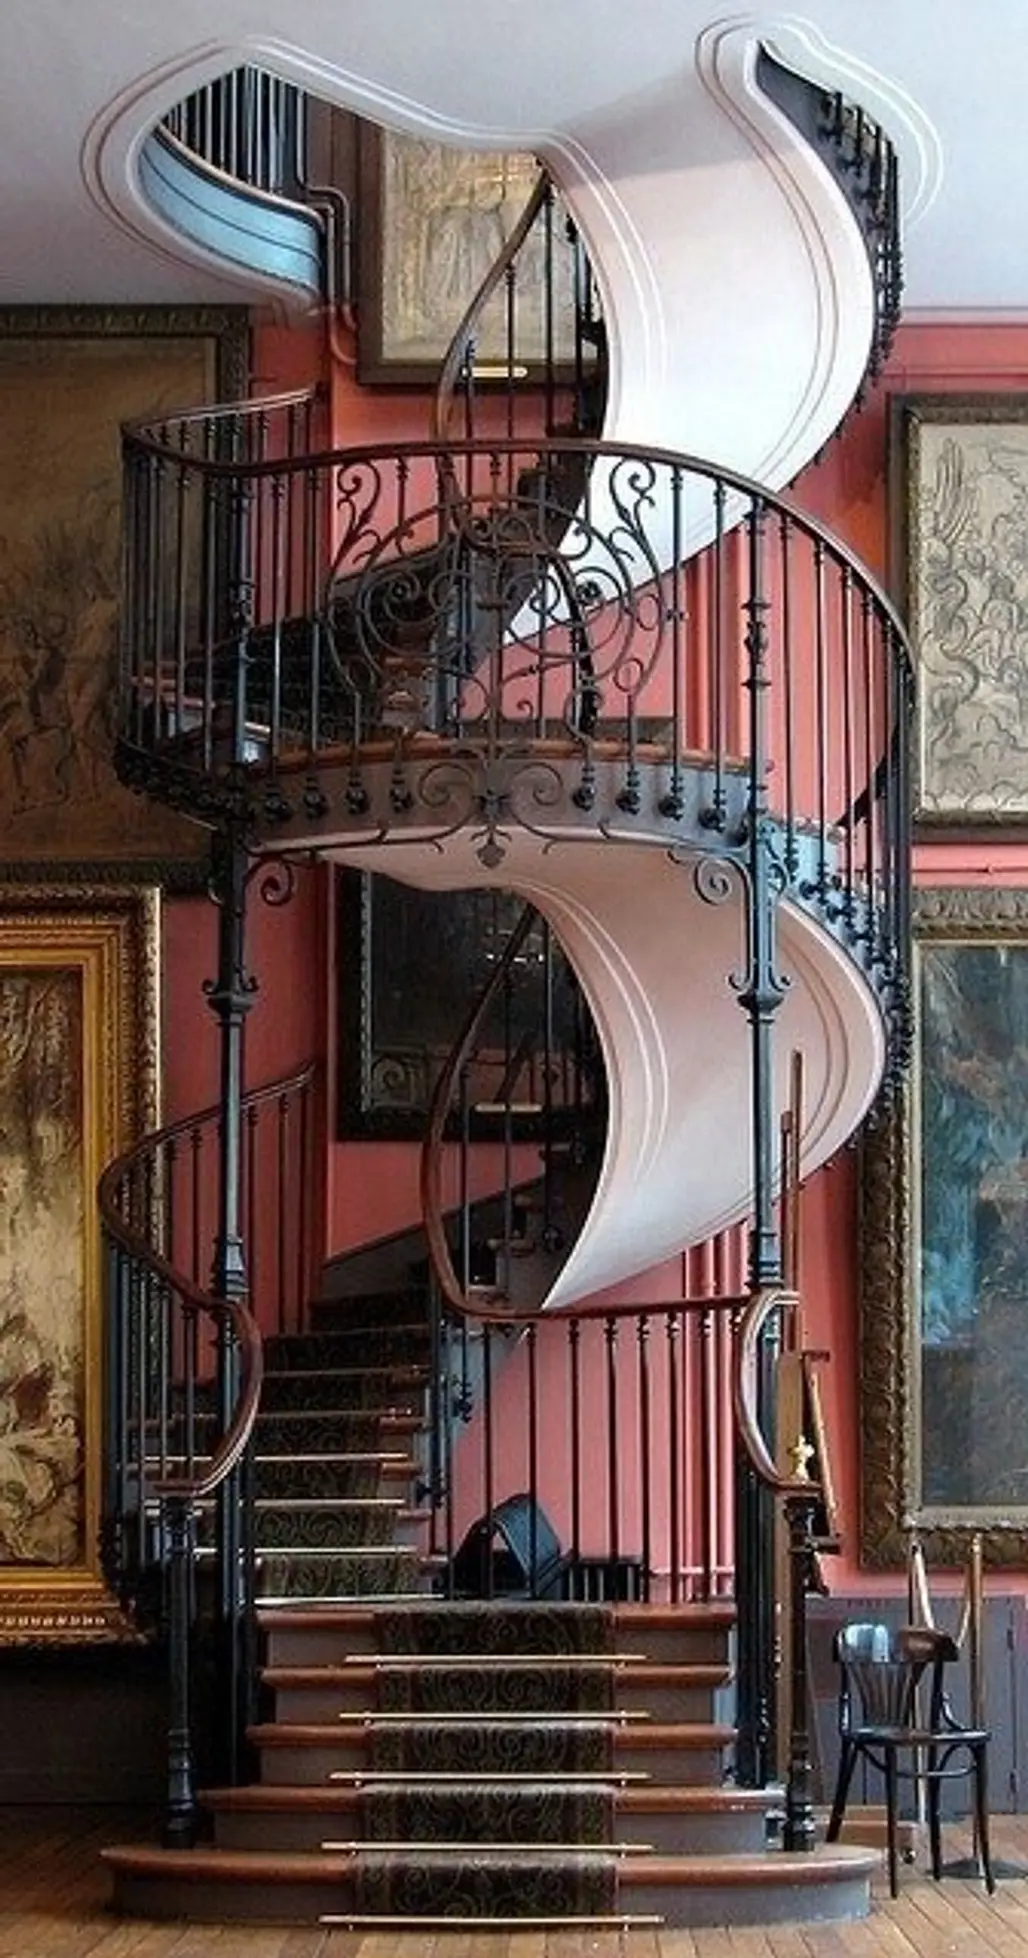 Spiral Staircase at the Musée National Gustave Moreau in Paris